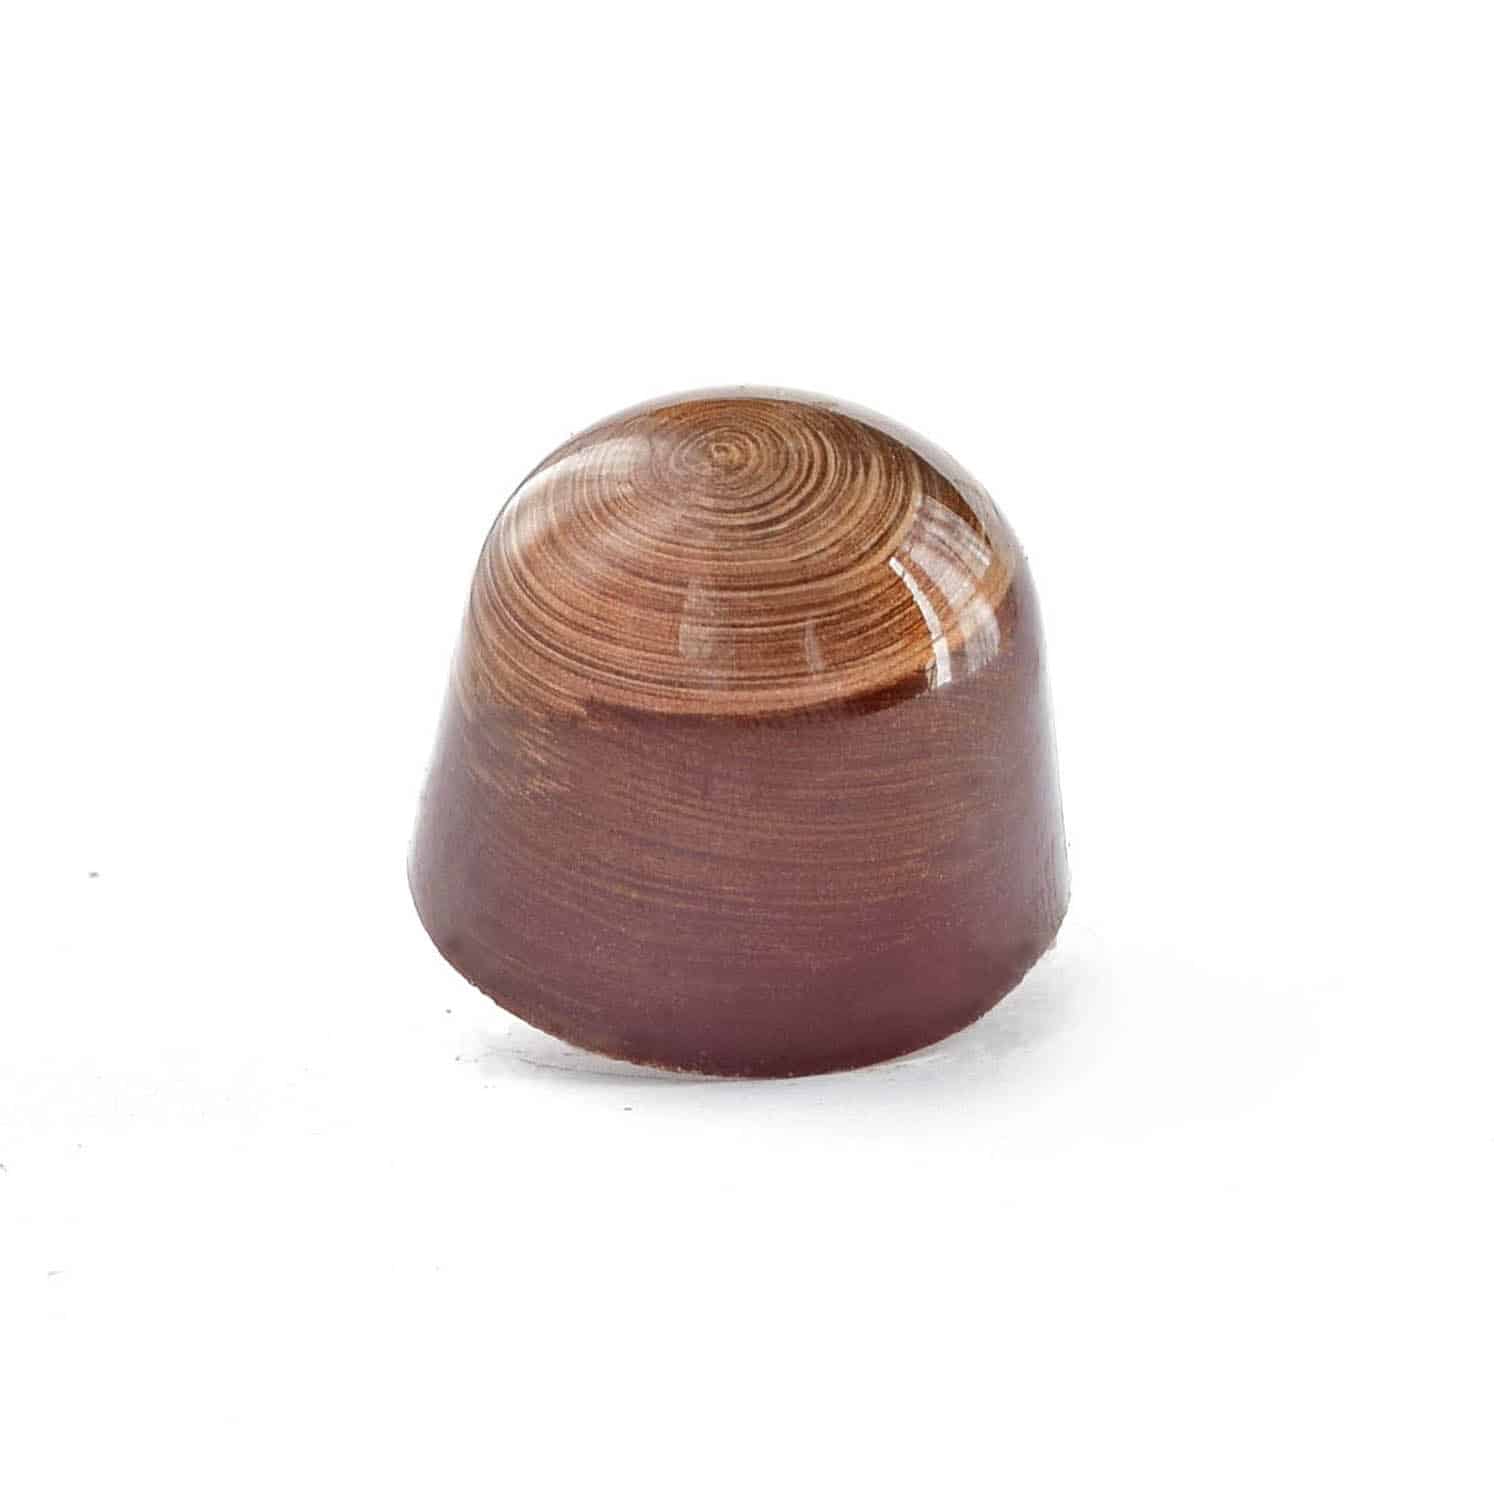 Side view of a light-brown gourmet chocolate truffle with light tan concentric circles; truffle tastes like mocha